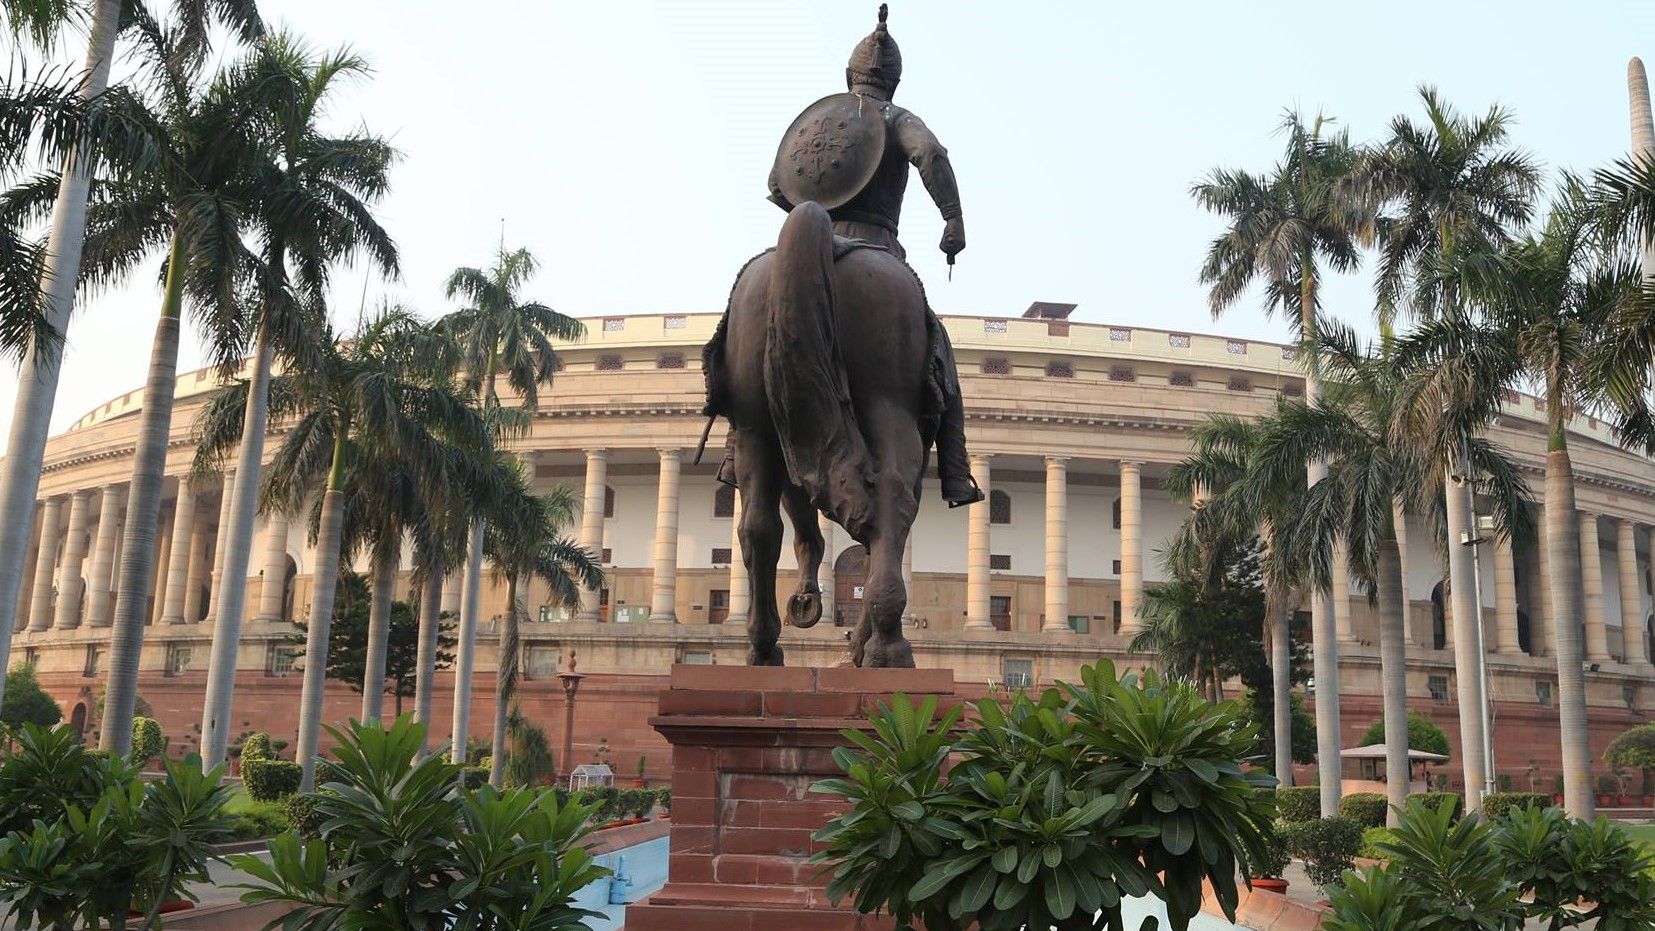 Think, who did not let the Parliament run, the government or the opposition? - Satya Hindi